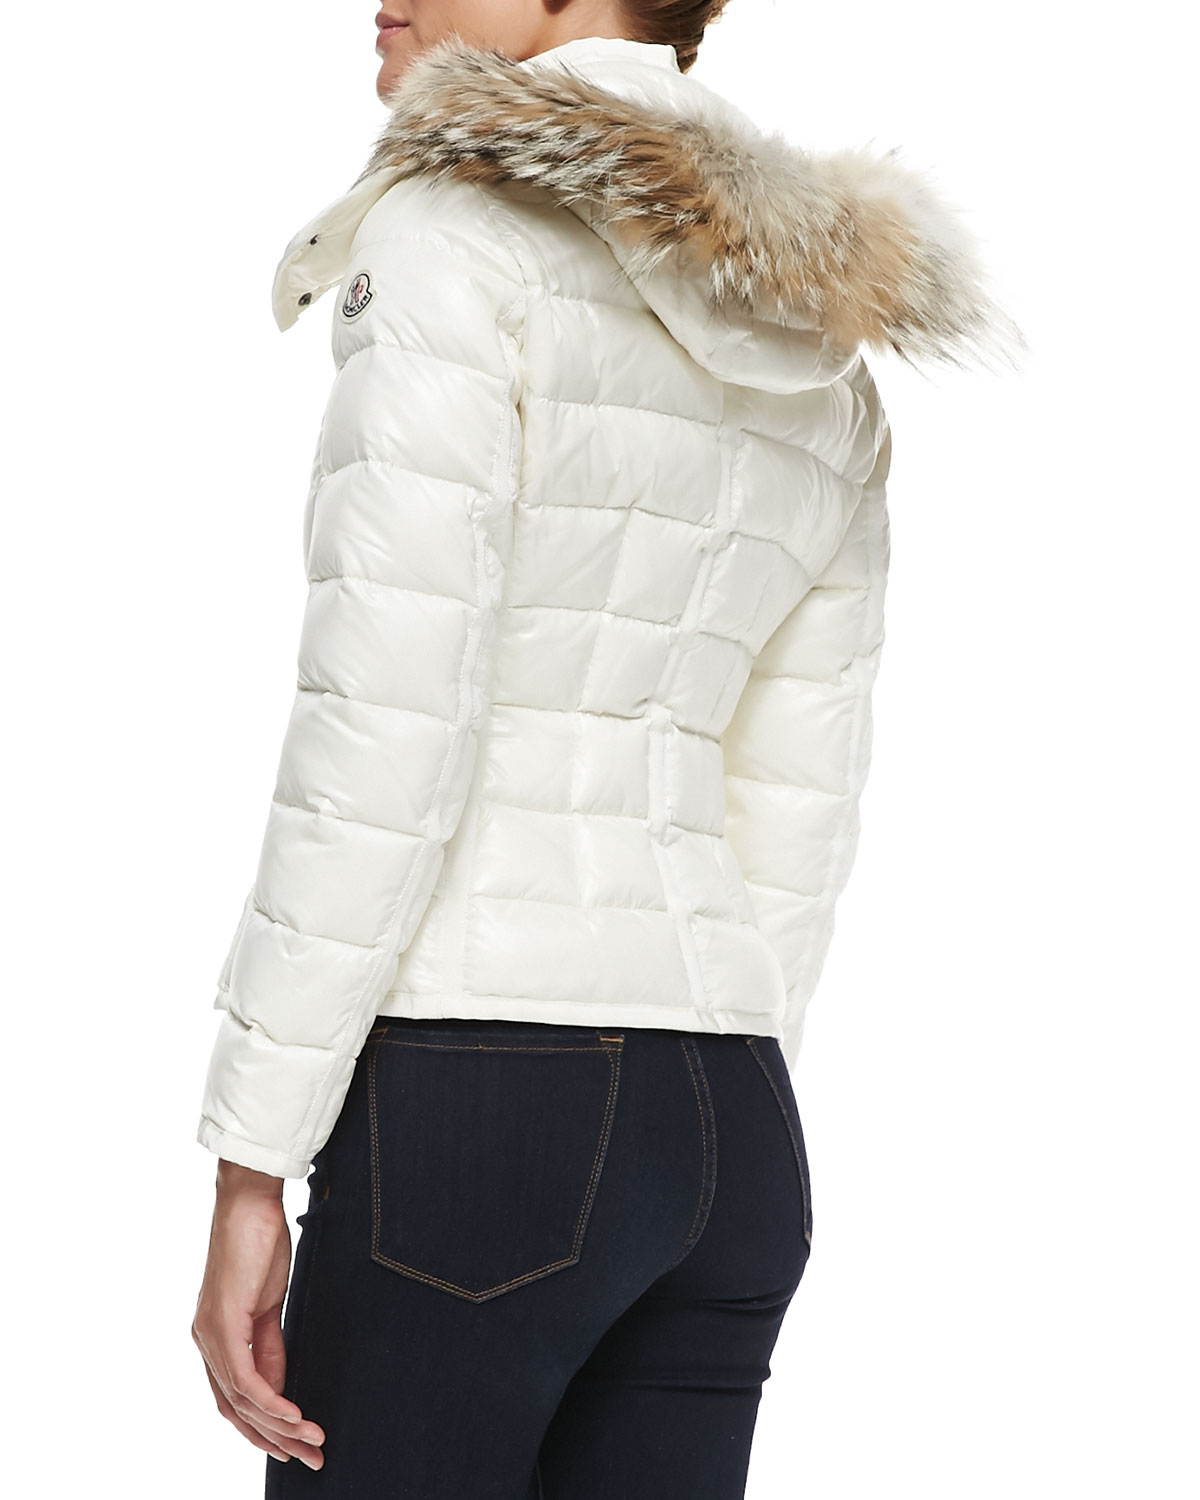 Lyst - Moncler Puffer Jacket With Fur-Trim Hood in White